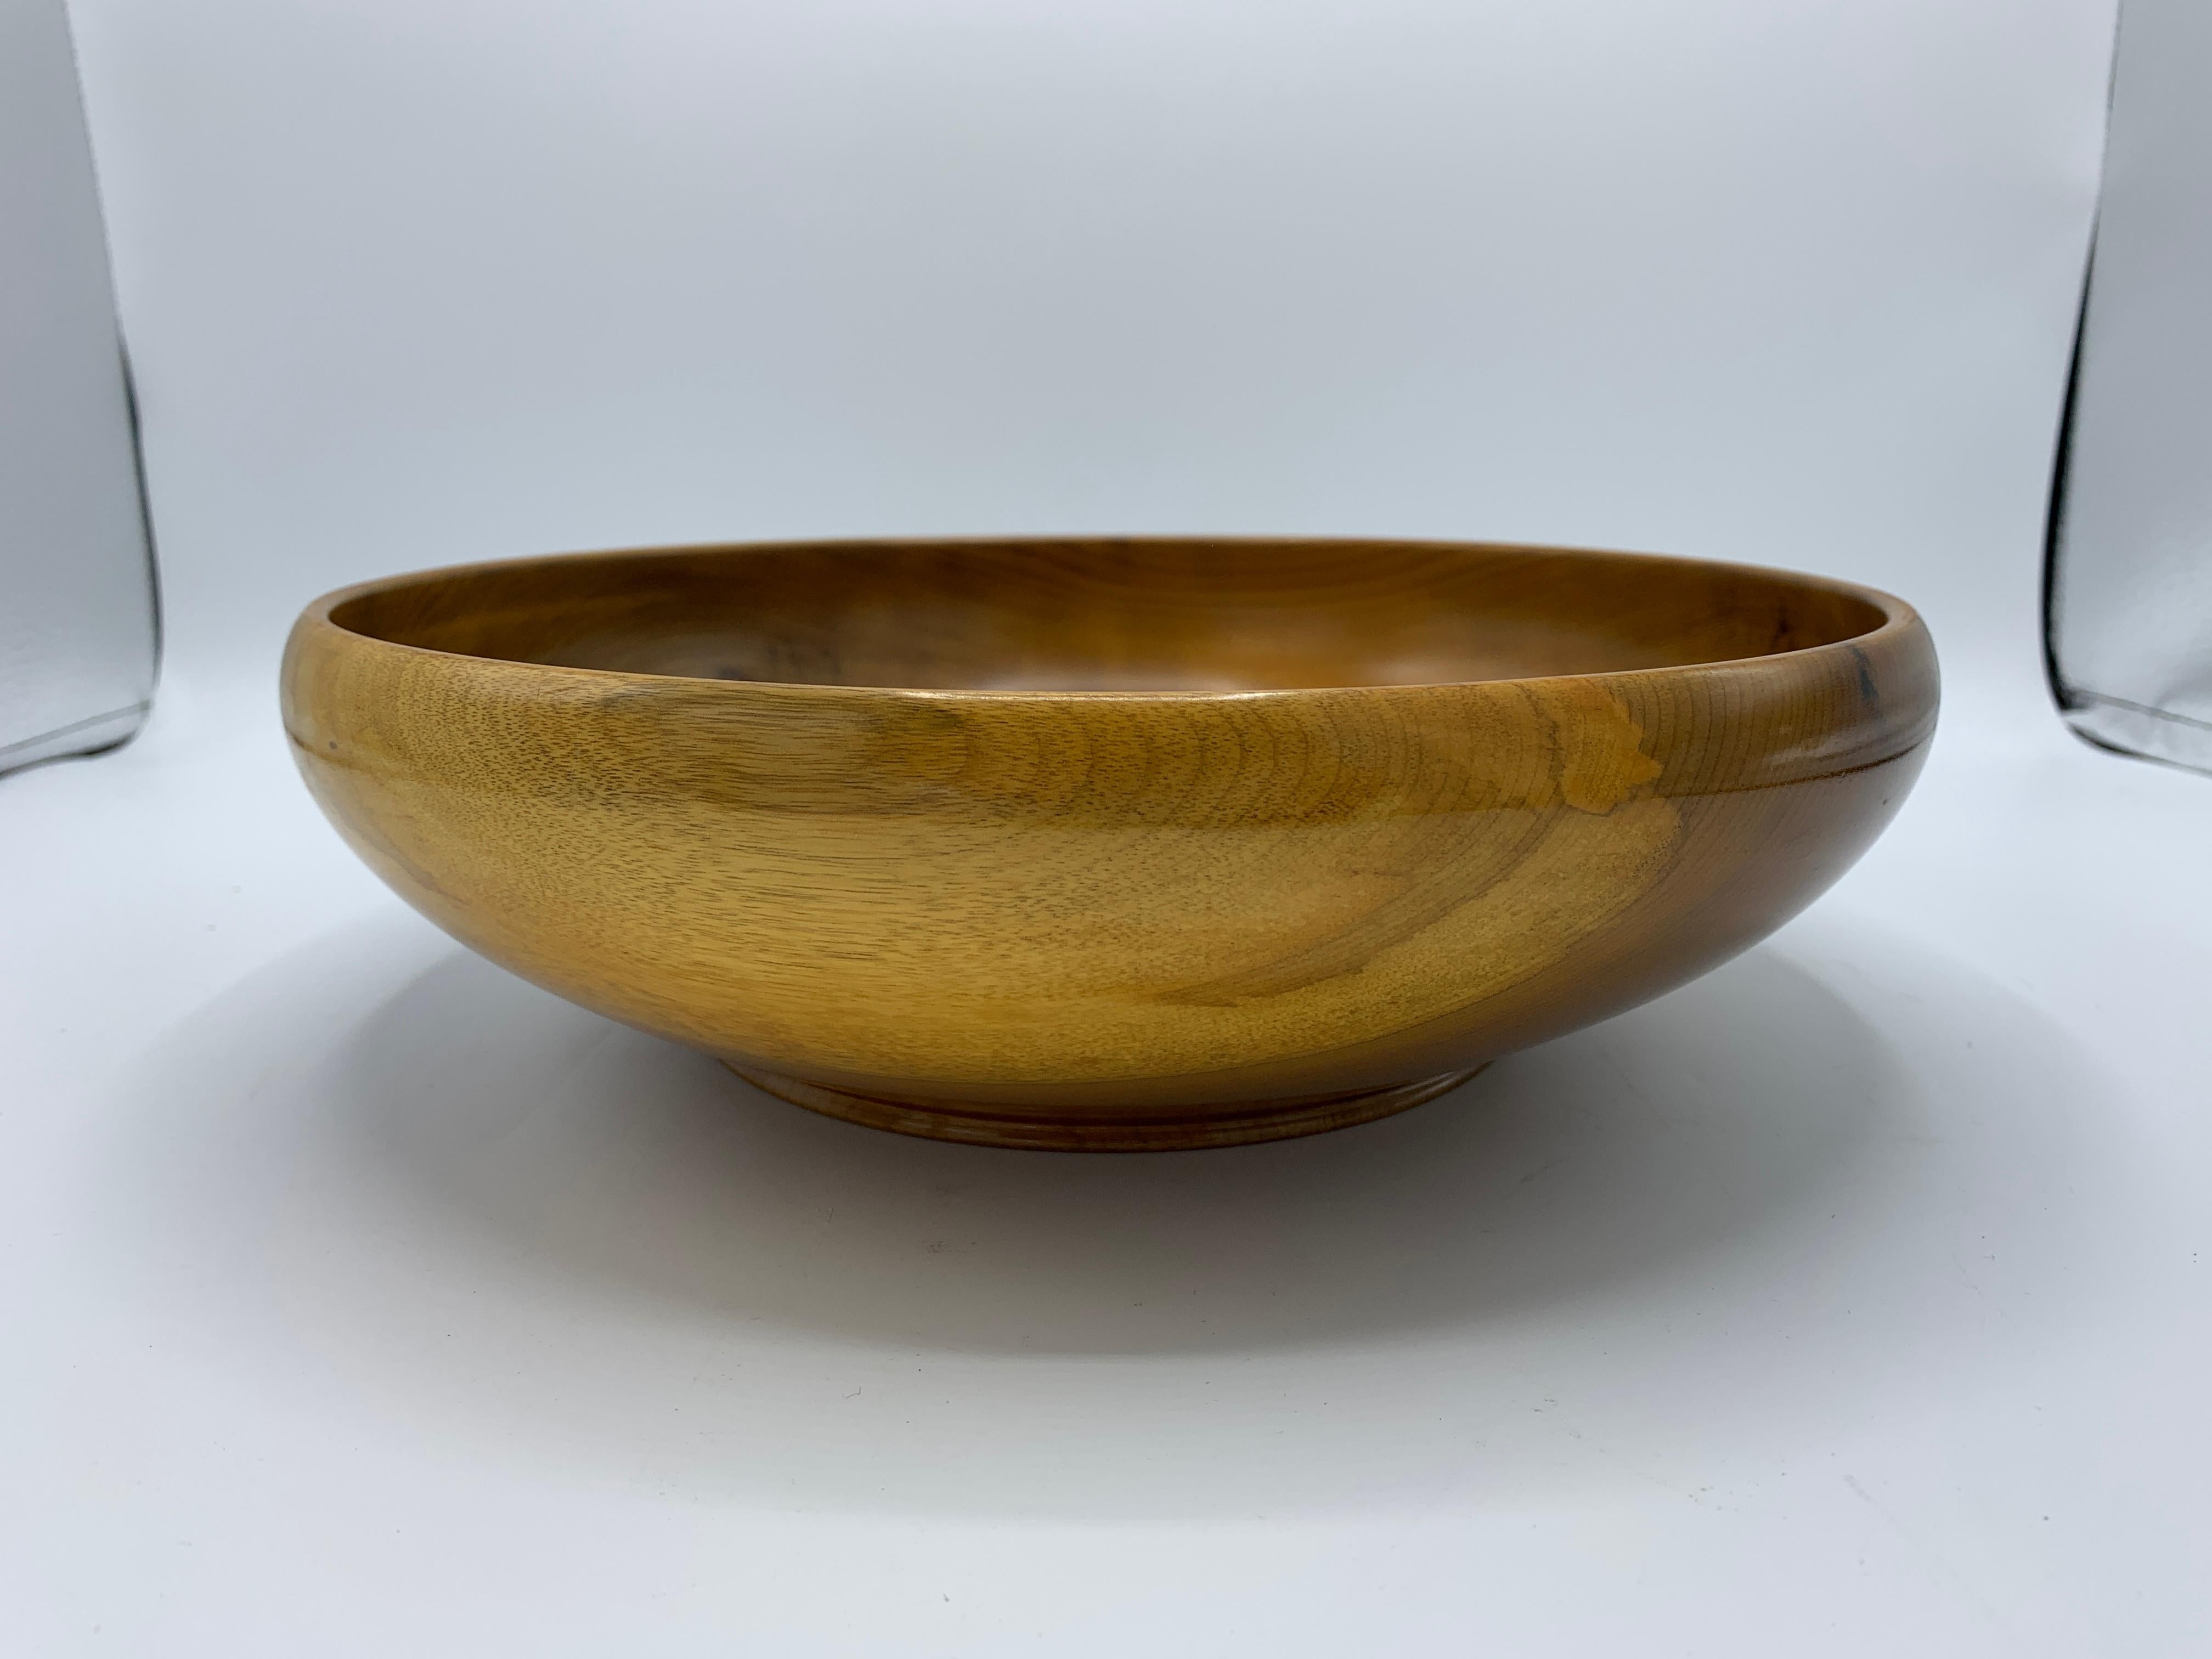 Listed is a beautiful and distinct, 1950s Mid-Century Modern, Myrtle wood bowl. This piece is perfect as a centerpiece, or fruit bowl. Handmade in Oregon, circa 1950s. Weighs 1.3lbs.